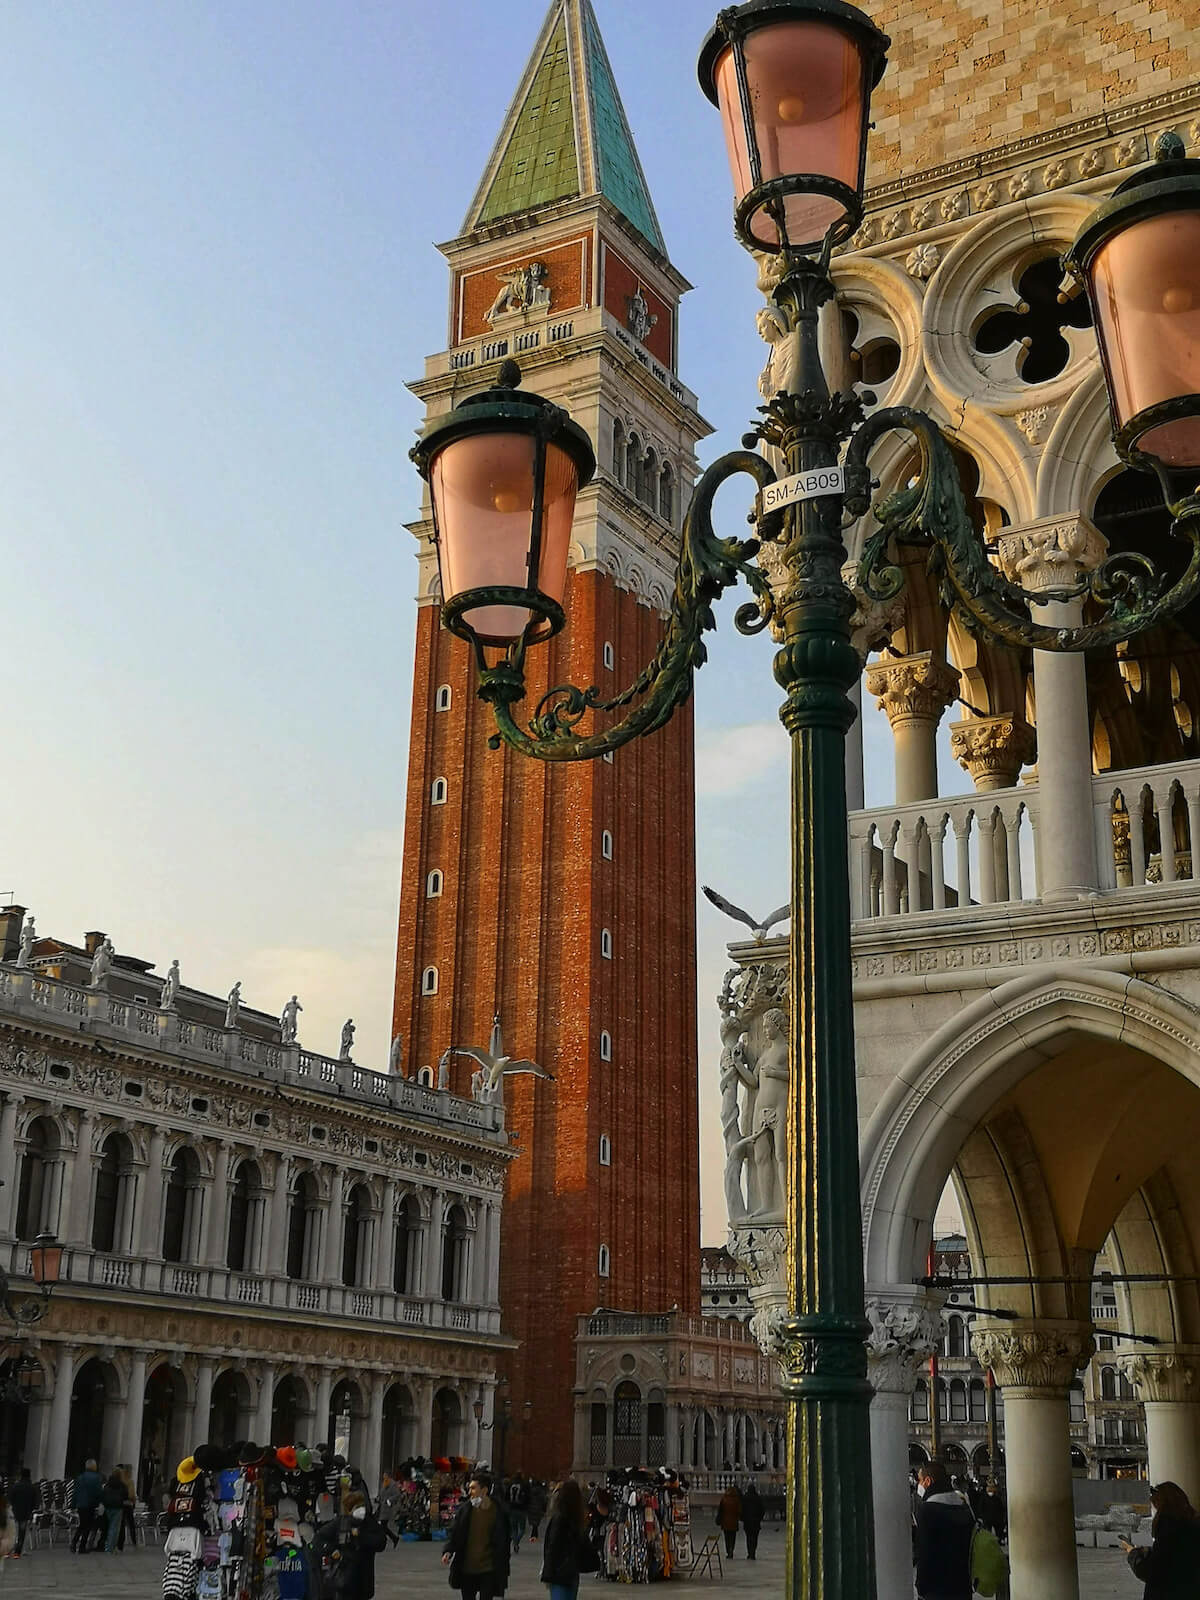 Magnificent Shopping Destination - Saint Marks Square at the